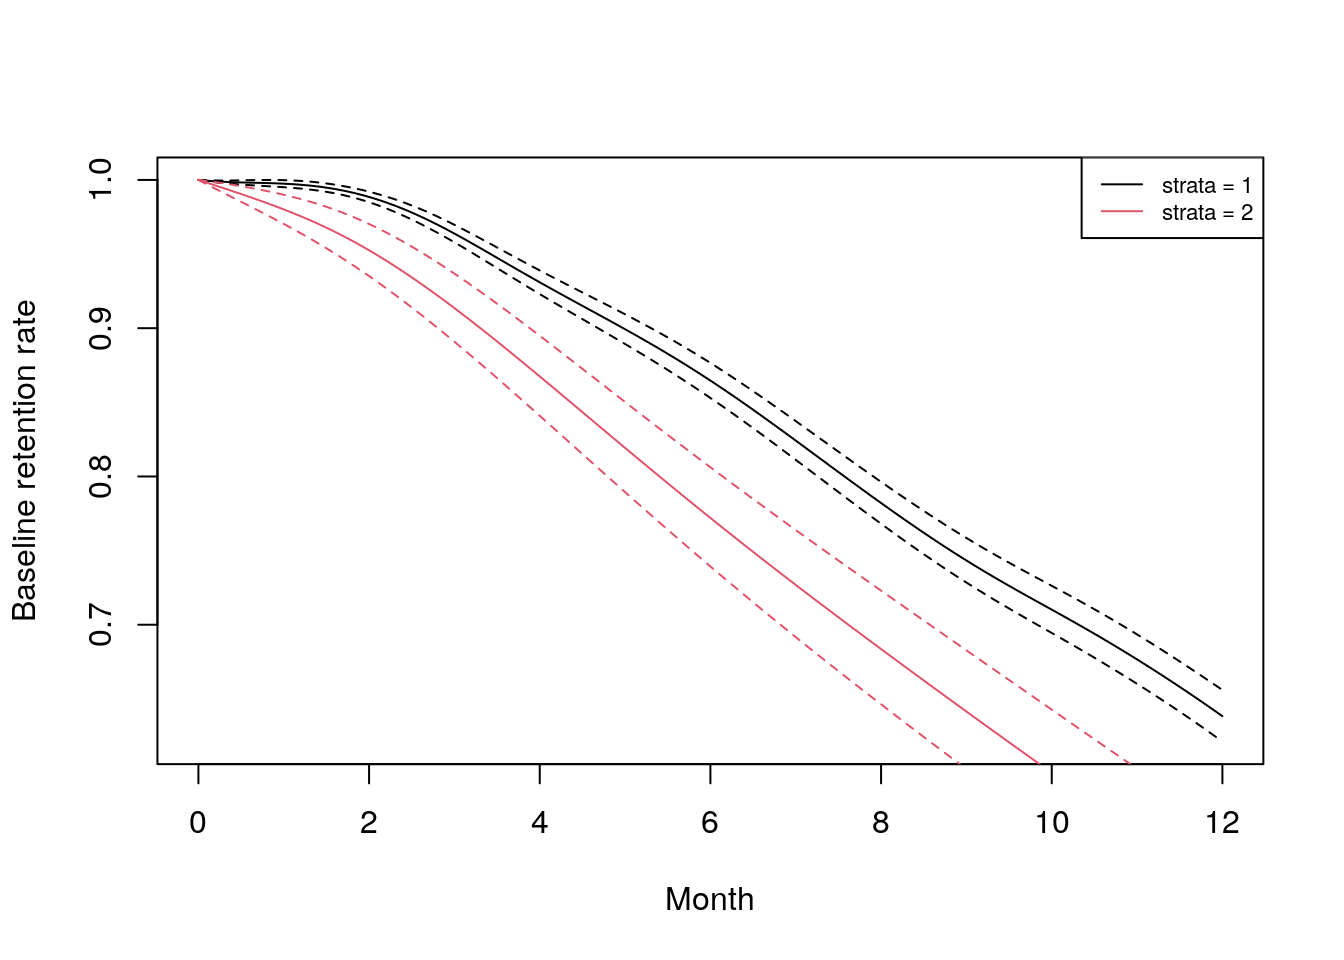 Baseline retention curves for the two sentiment categories in the `job_retention` data set